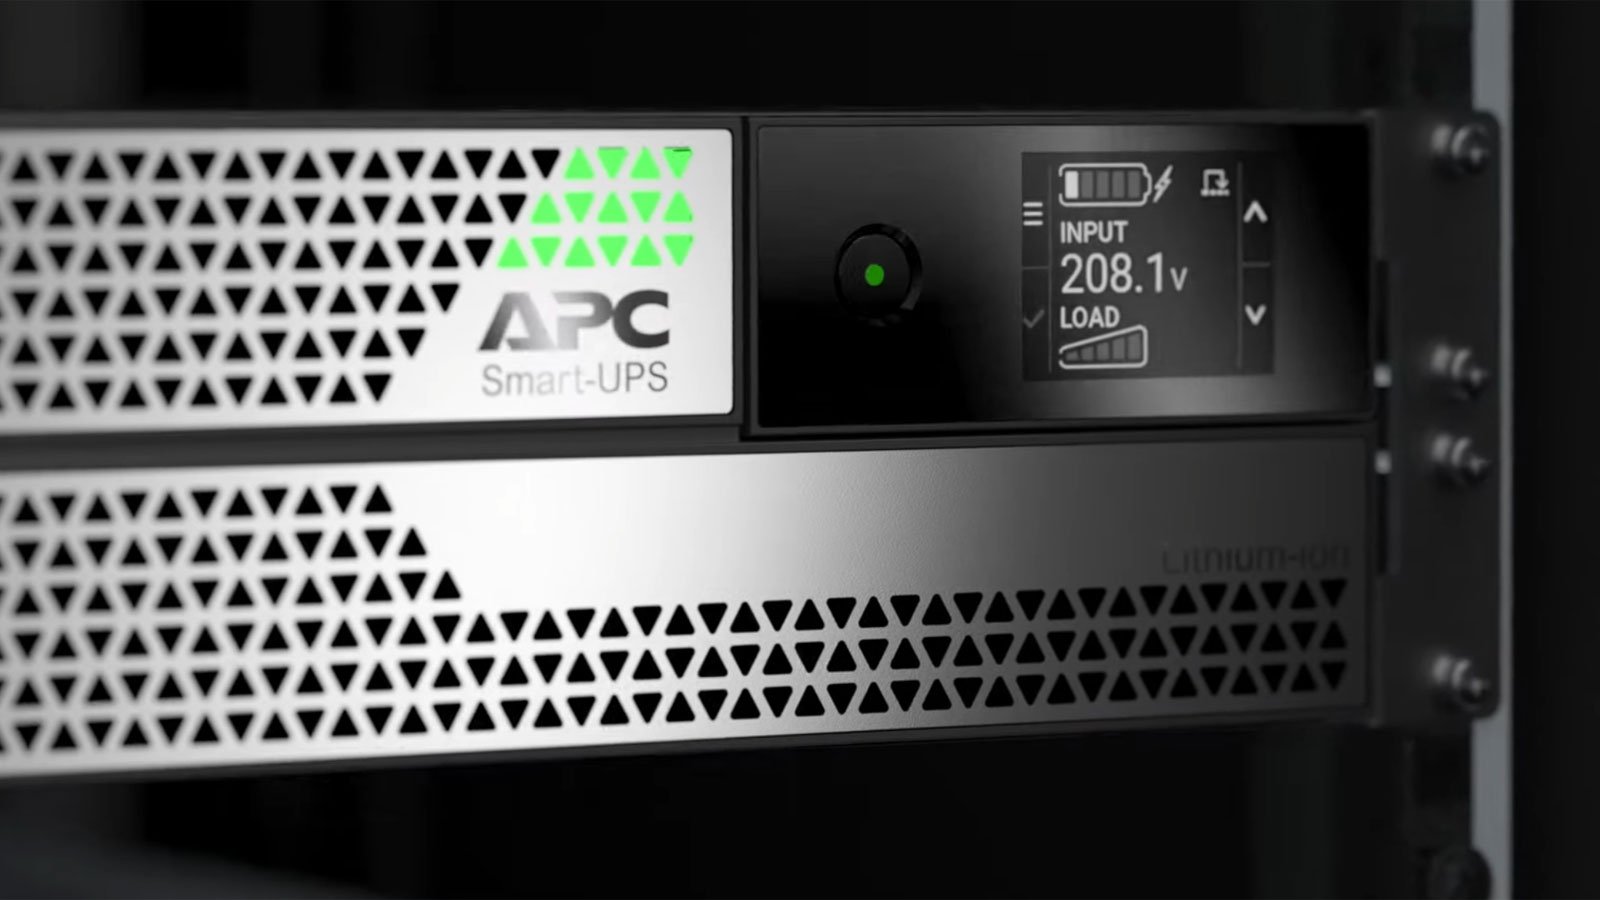 APC warns of critical unauthenticated RCE flaws in UPS software